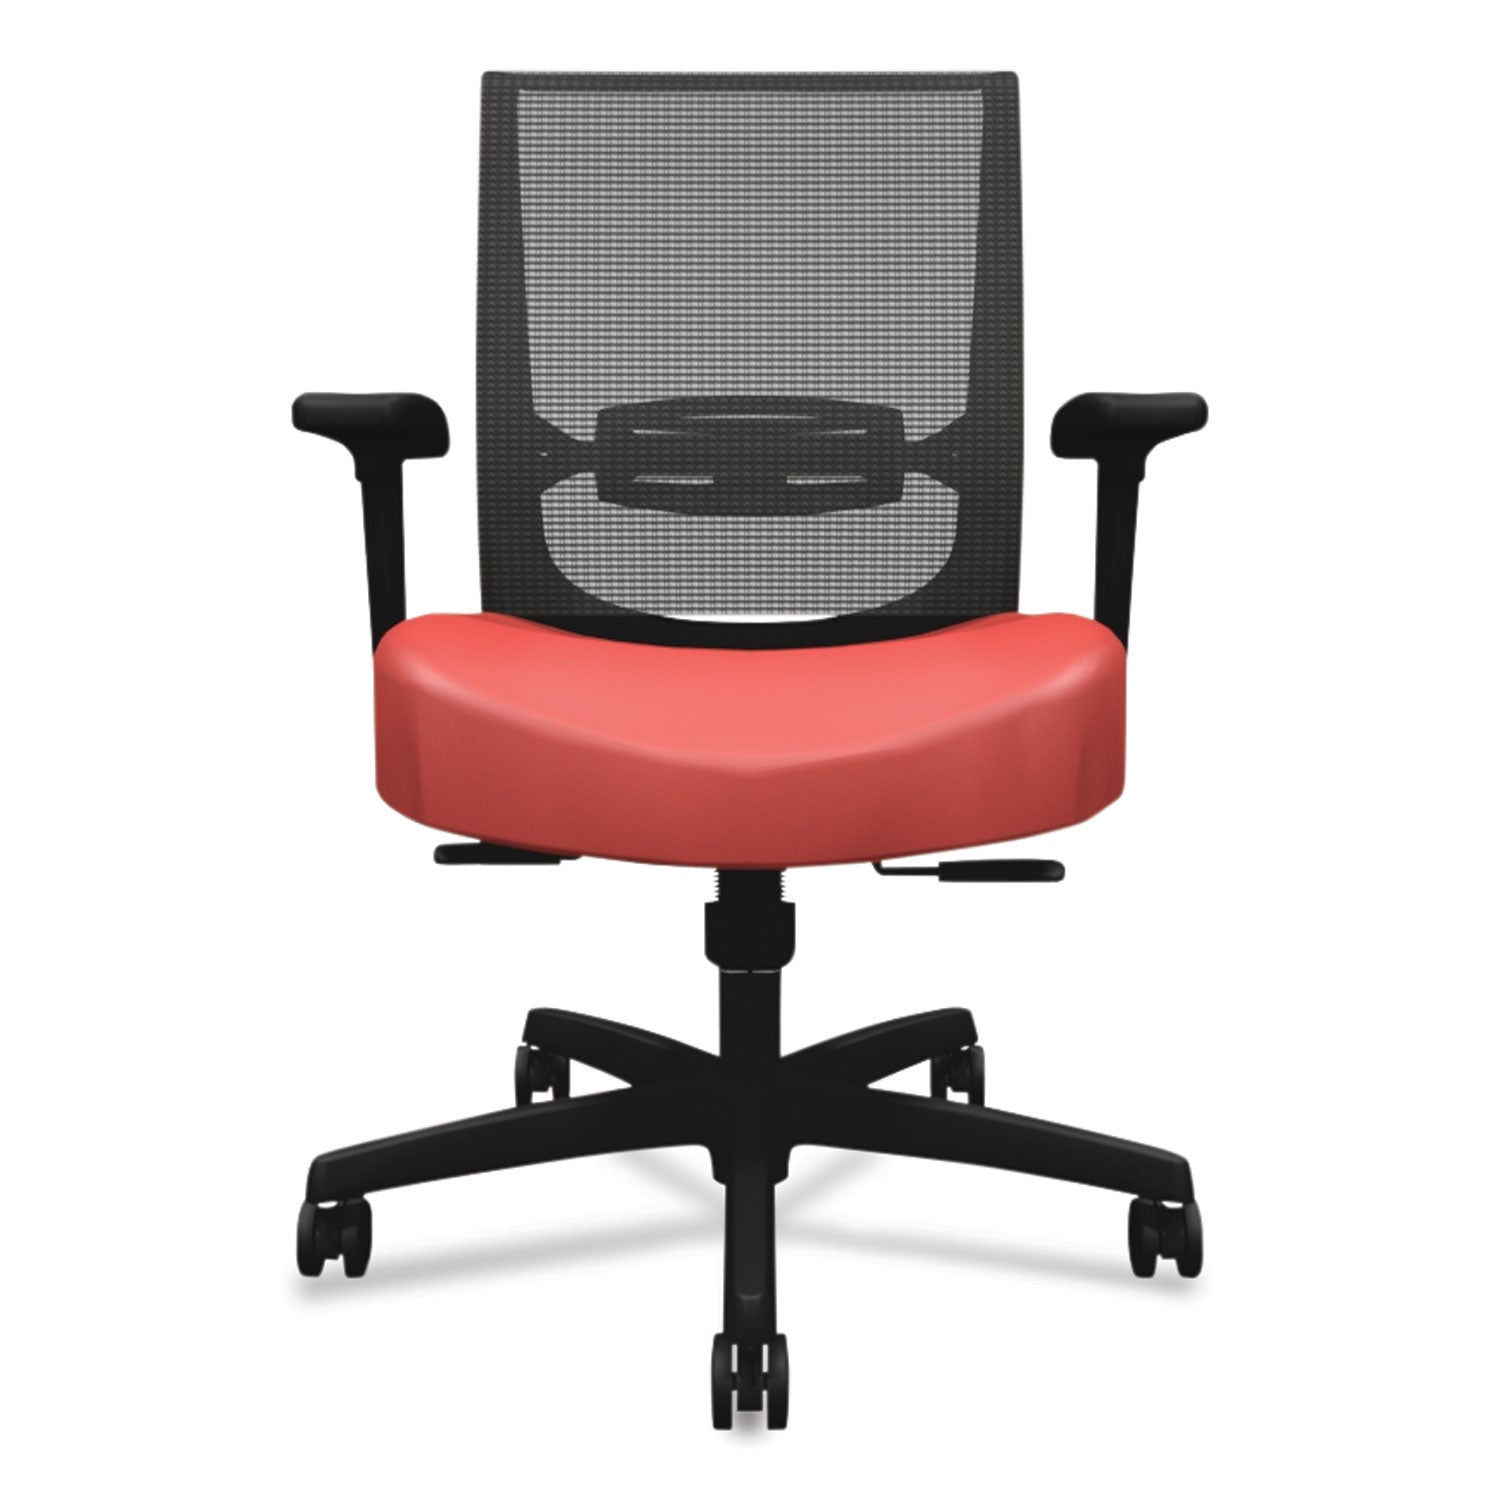 convergence-mid-back-task-chair-synchro-tilt-and-seat-glide-supports-up-to-275-lb-red-seat-black-back-base_honcmy1acu67 - 2